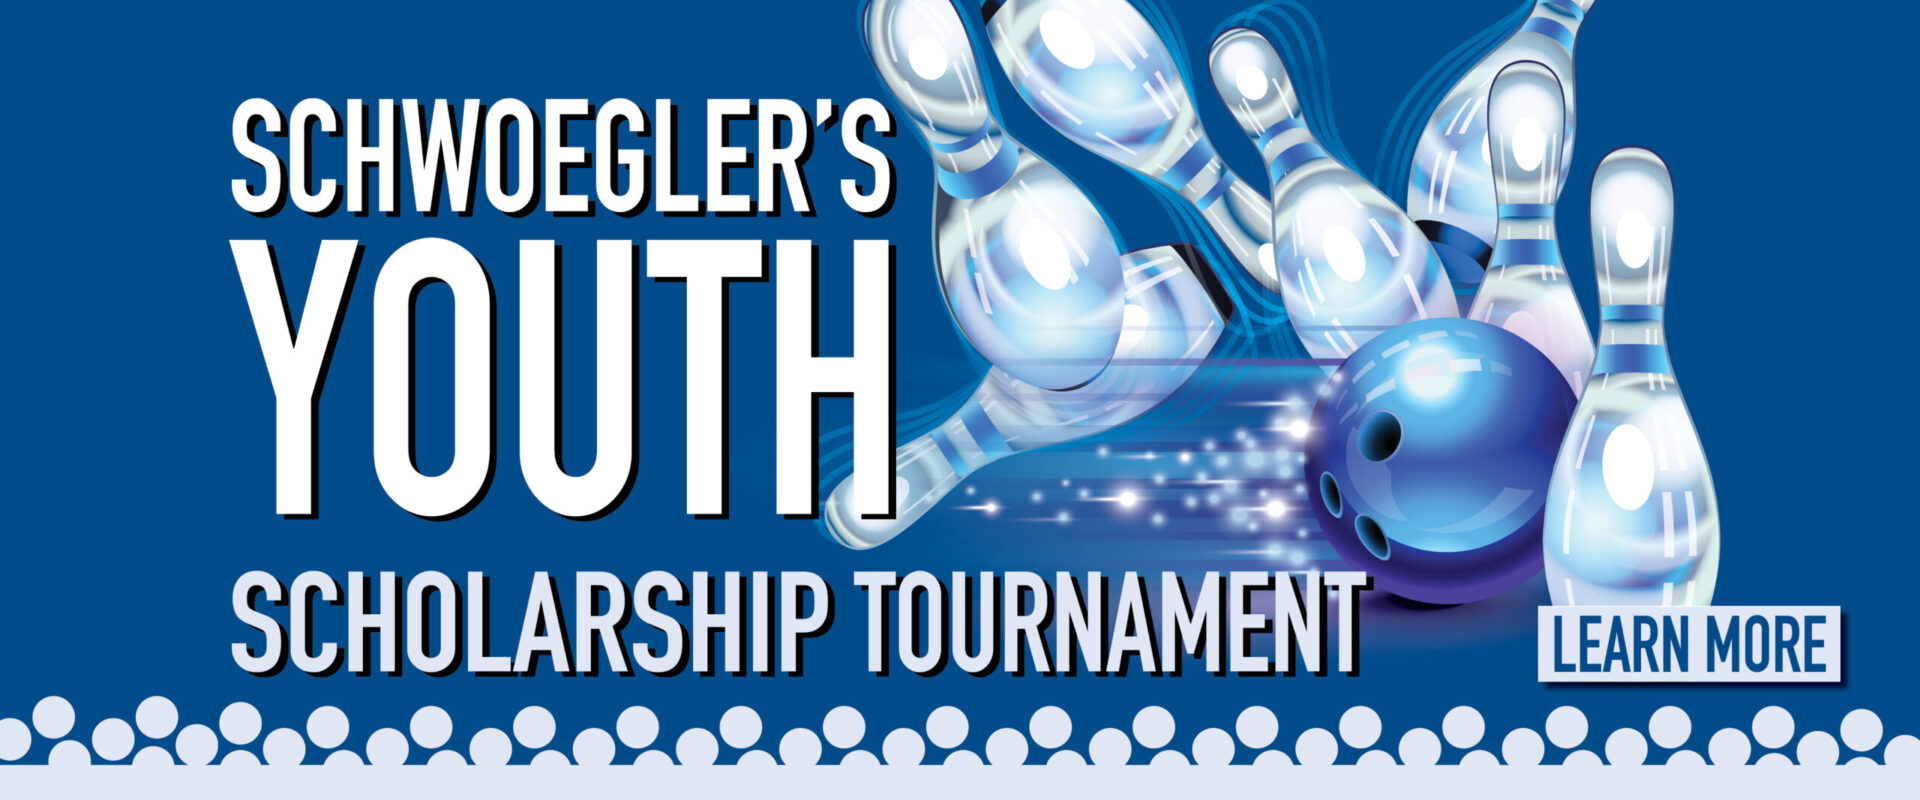 Youth Scholarship tournament